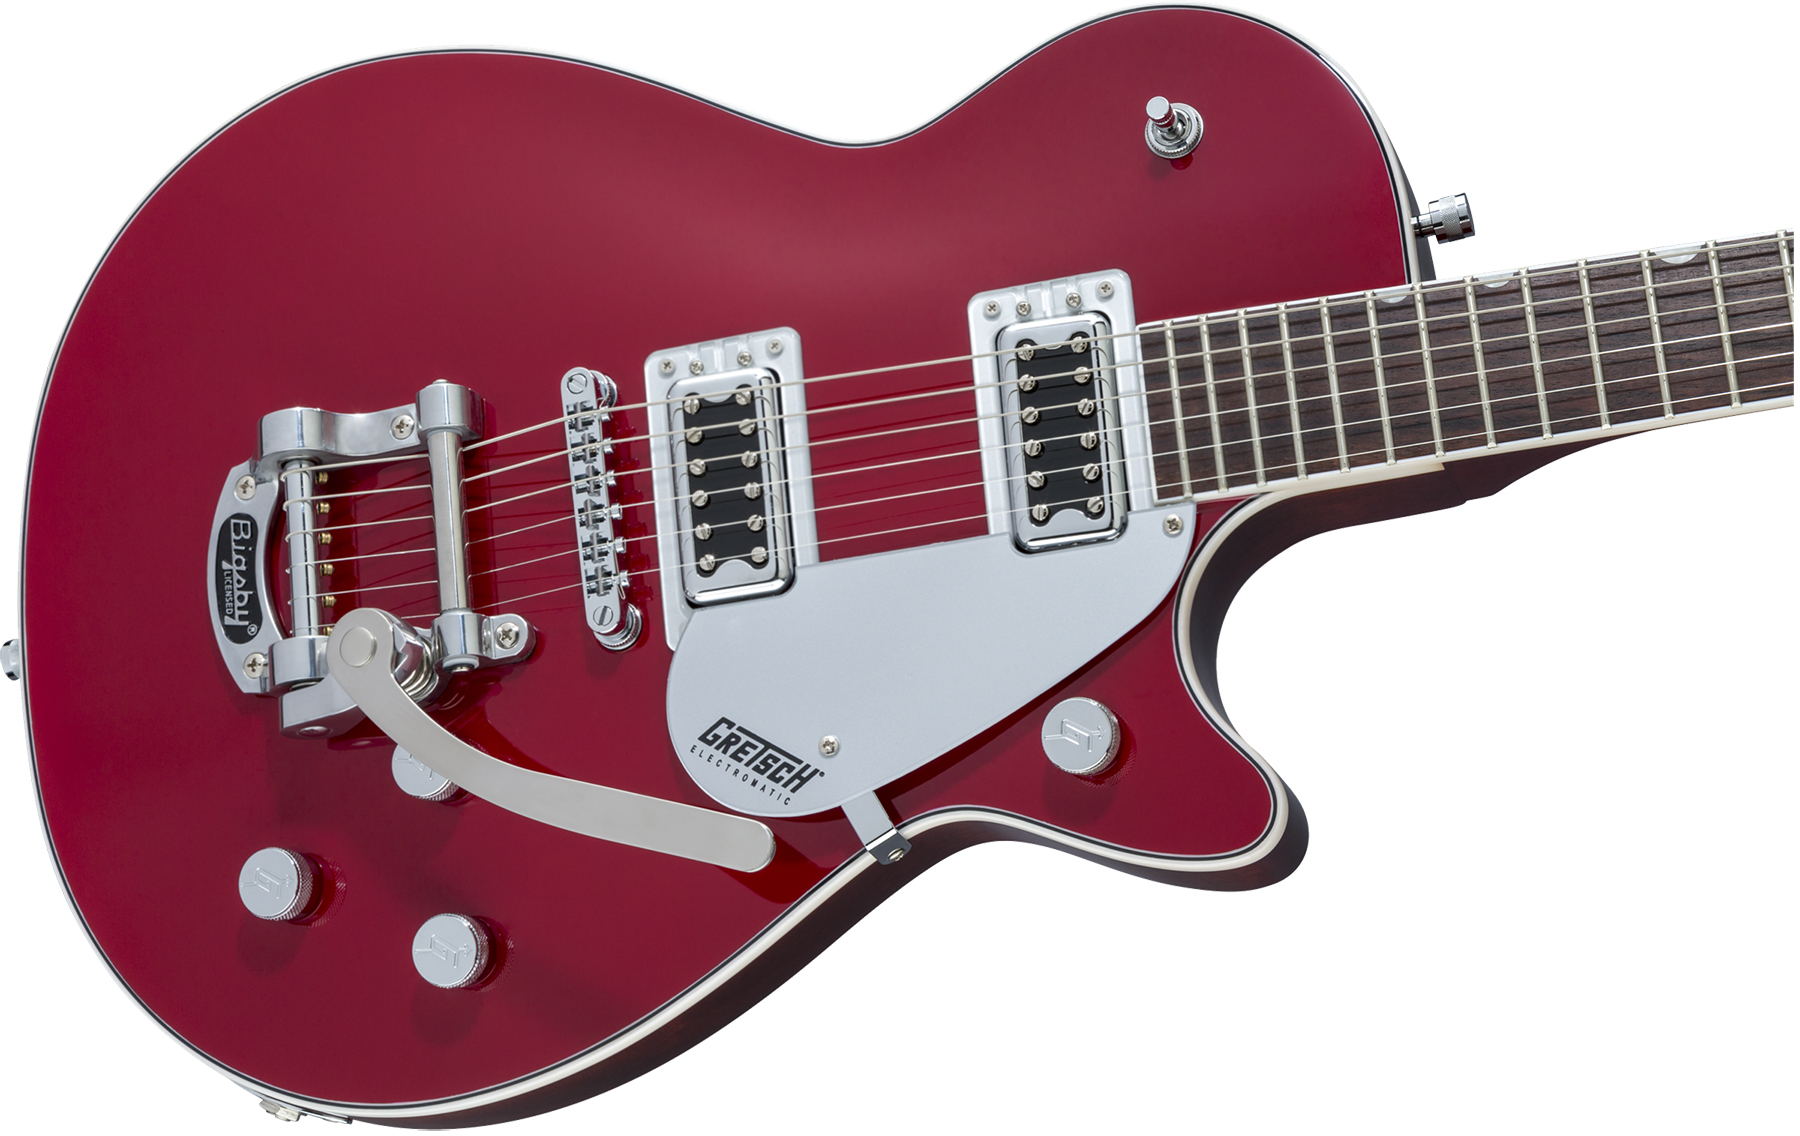 Gretsch G5230t Electromatic Jet Ft Single-cut Bigsby Hh Trem Wal - Firebird Red - Single cut electric guitar - Variation 2